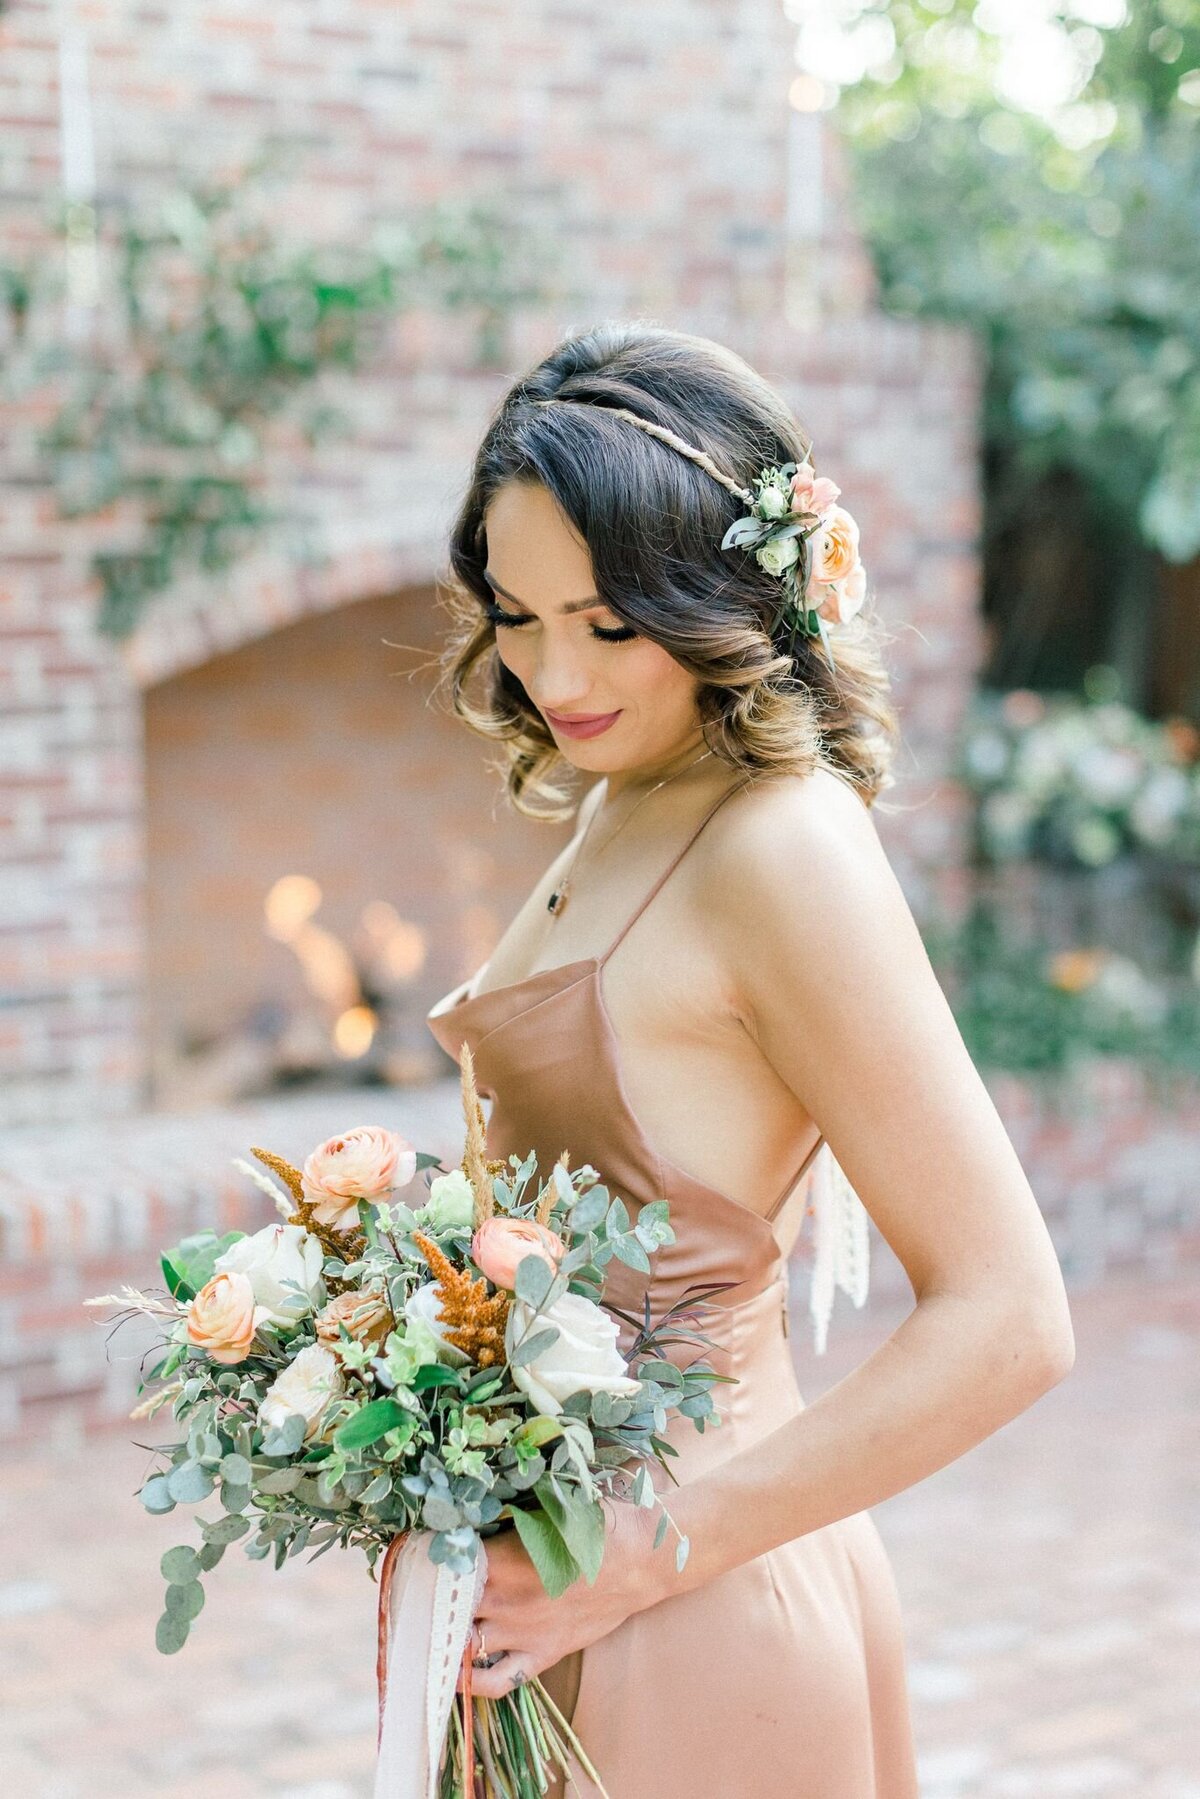 Not only does the bridesmaid hold a stunning bouquet of flowers but she wears a minimal flower crown.